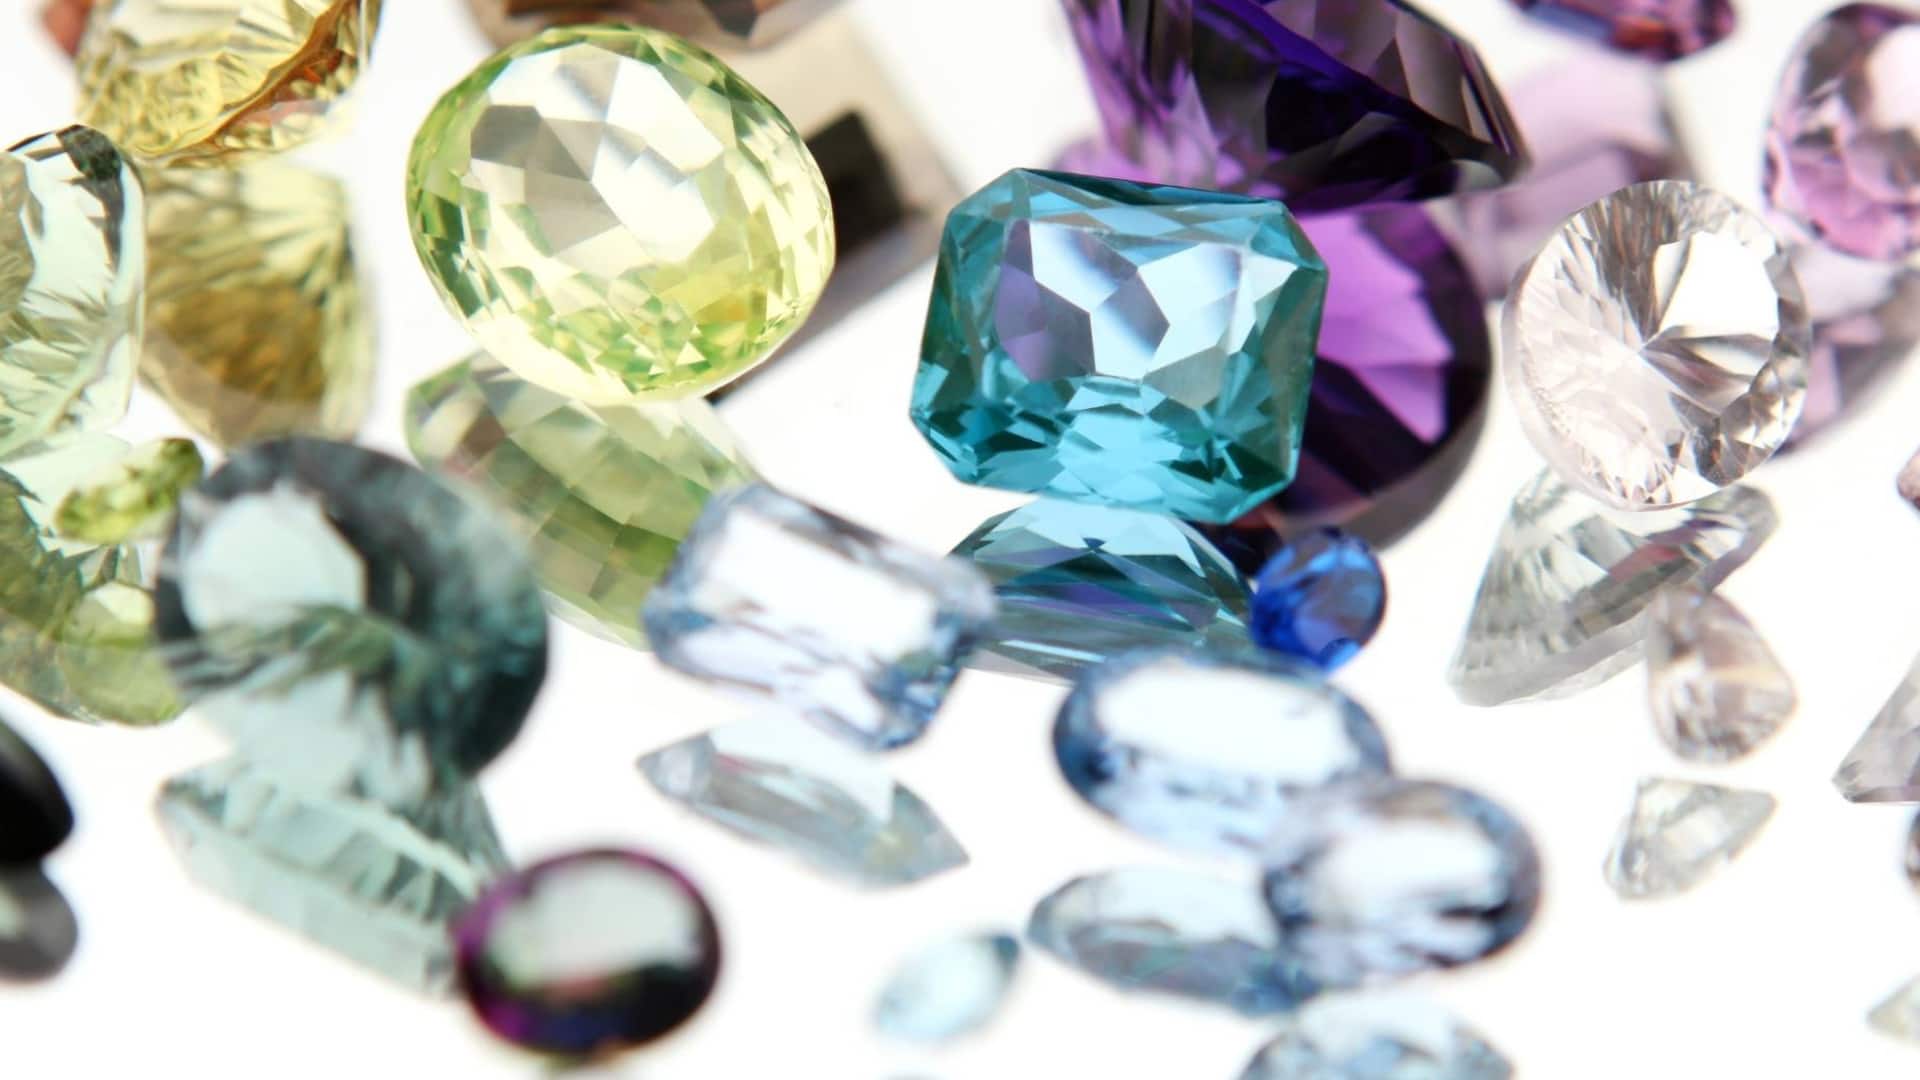 Gems in different shades of colors